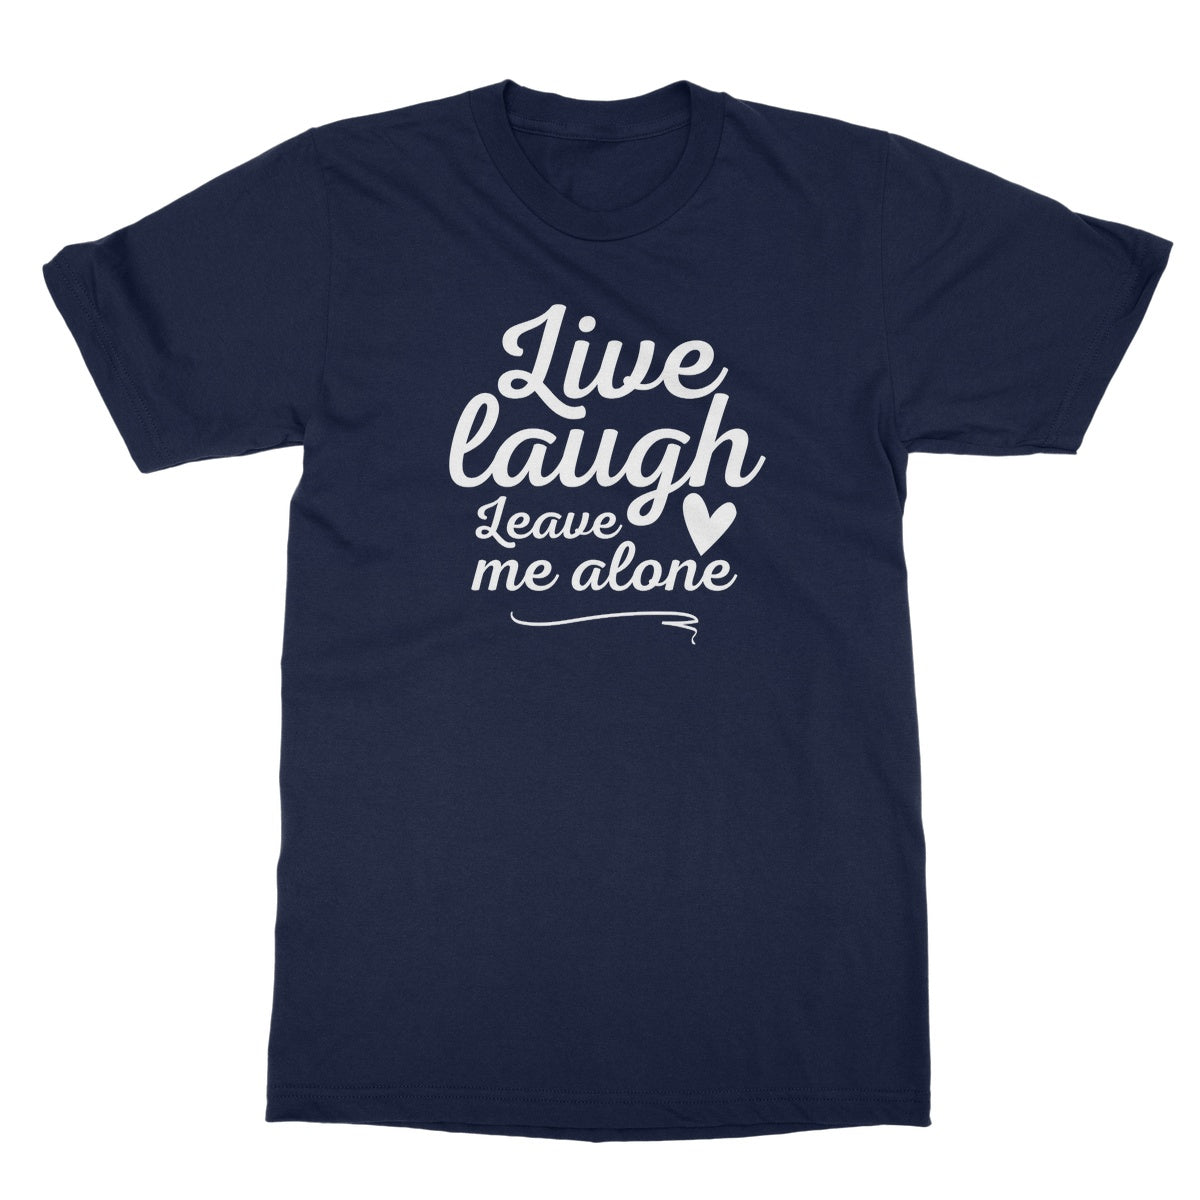 live laugh leave me alone t shirt navy